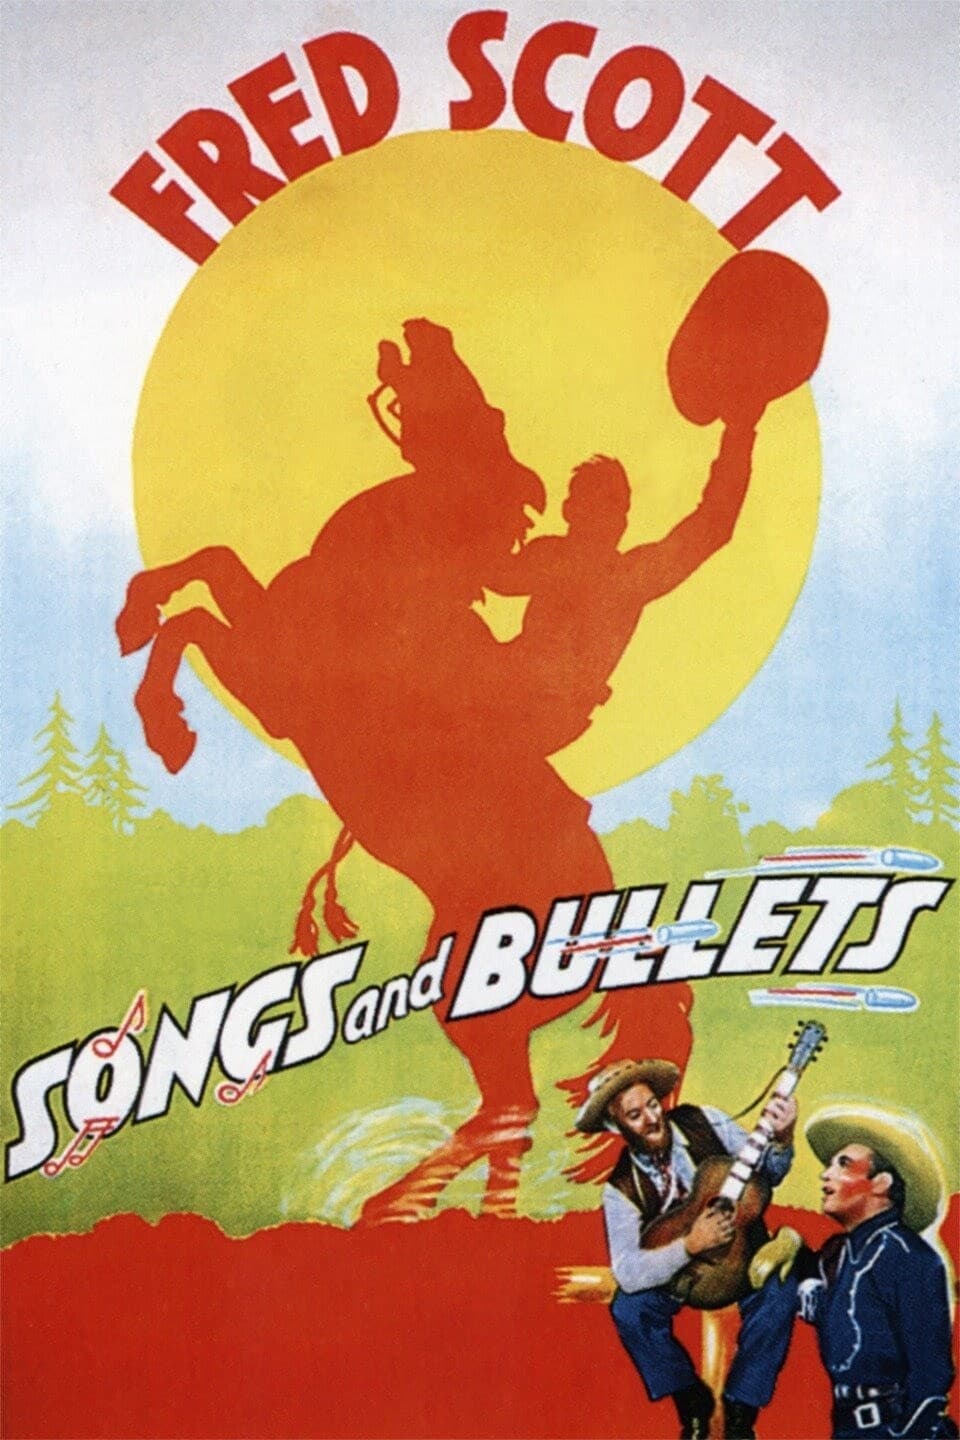 Songs and Bullets (1938)